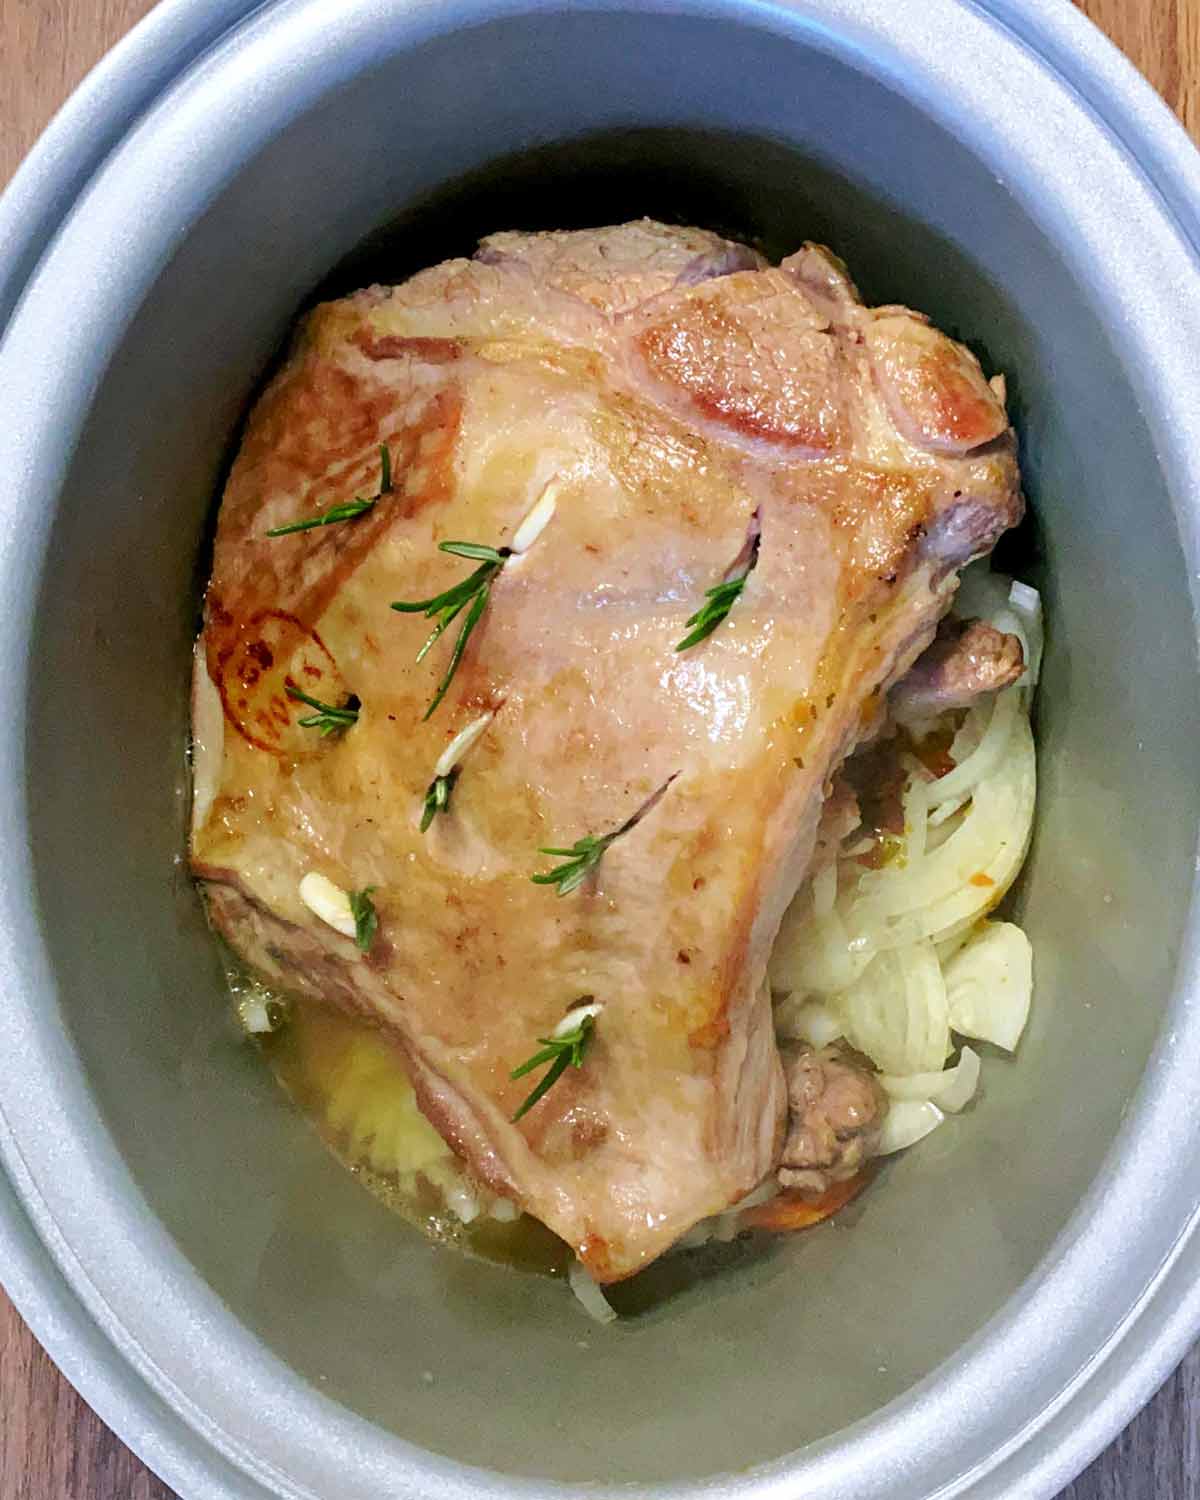 Rosemary leaves and garlic studded into the lamb.